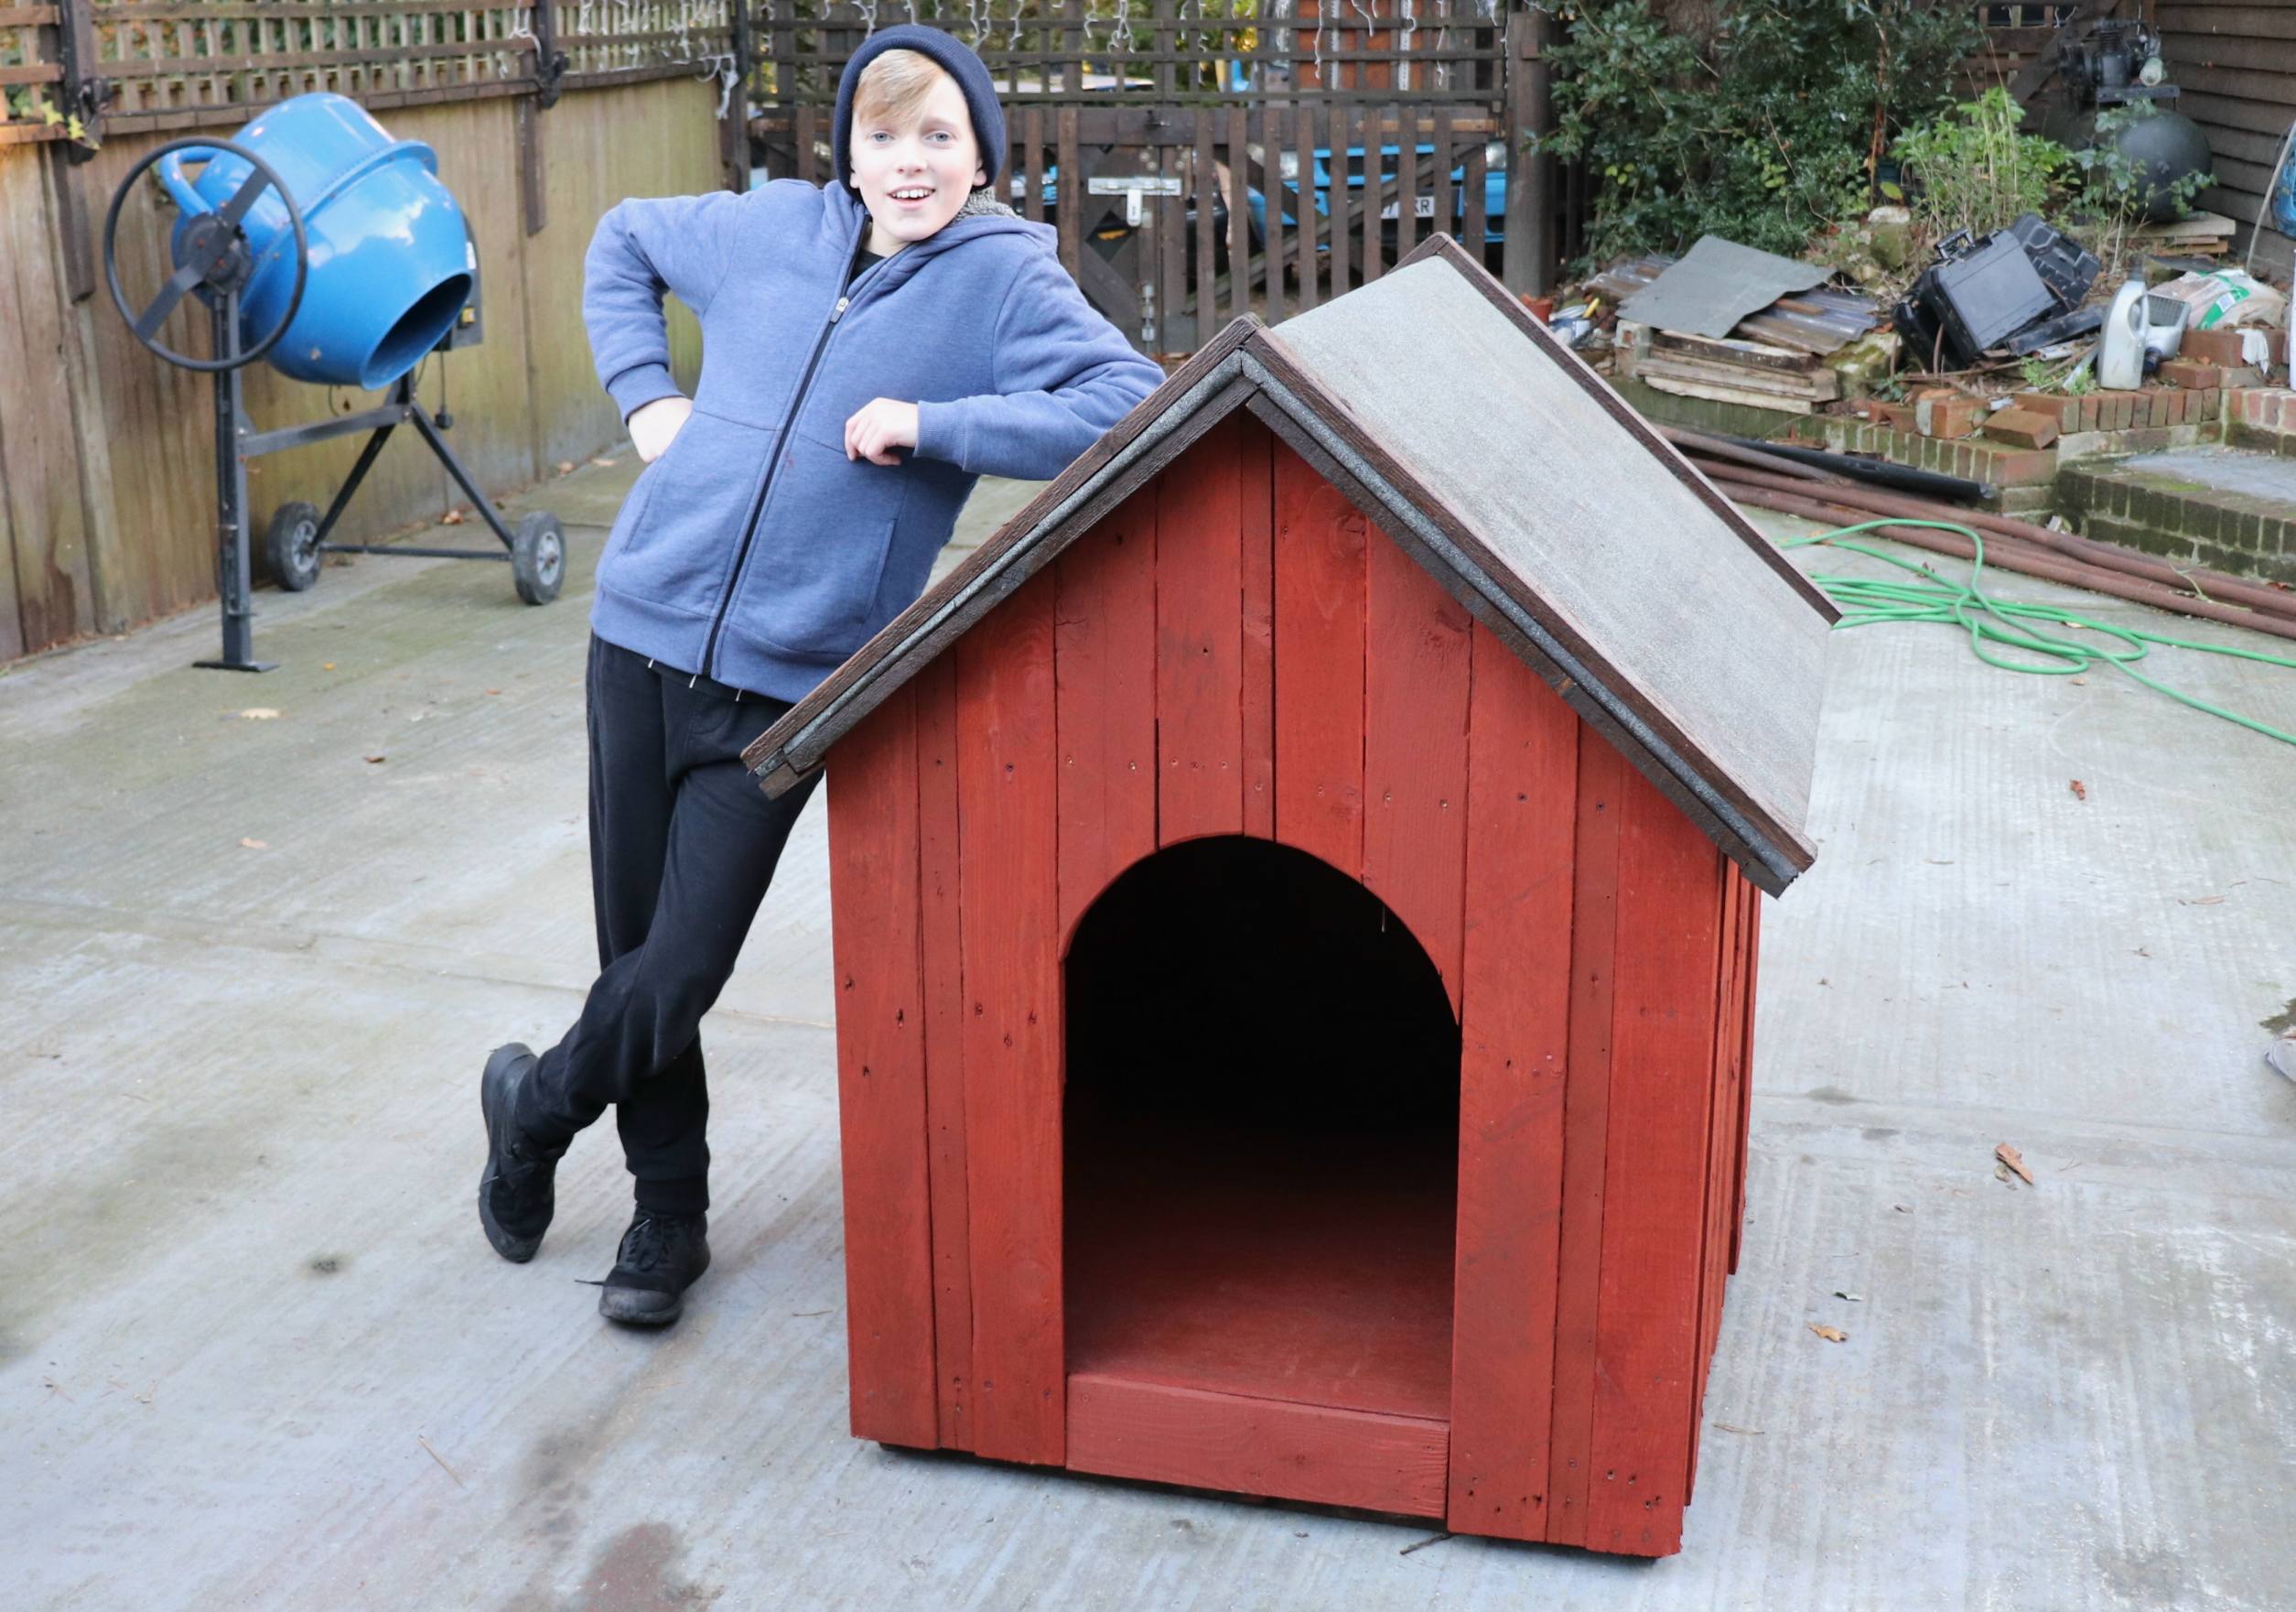 This is the kennel I built for my Sprocker Spaniel: Bella